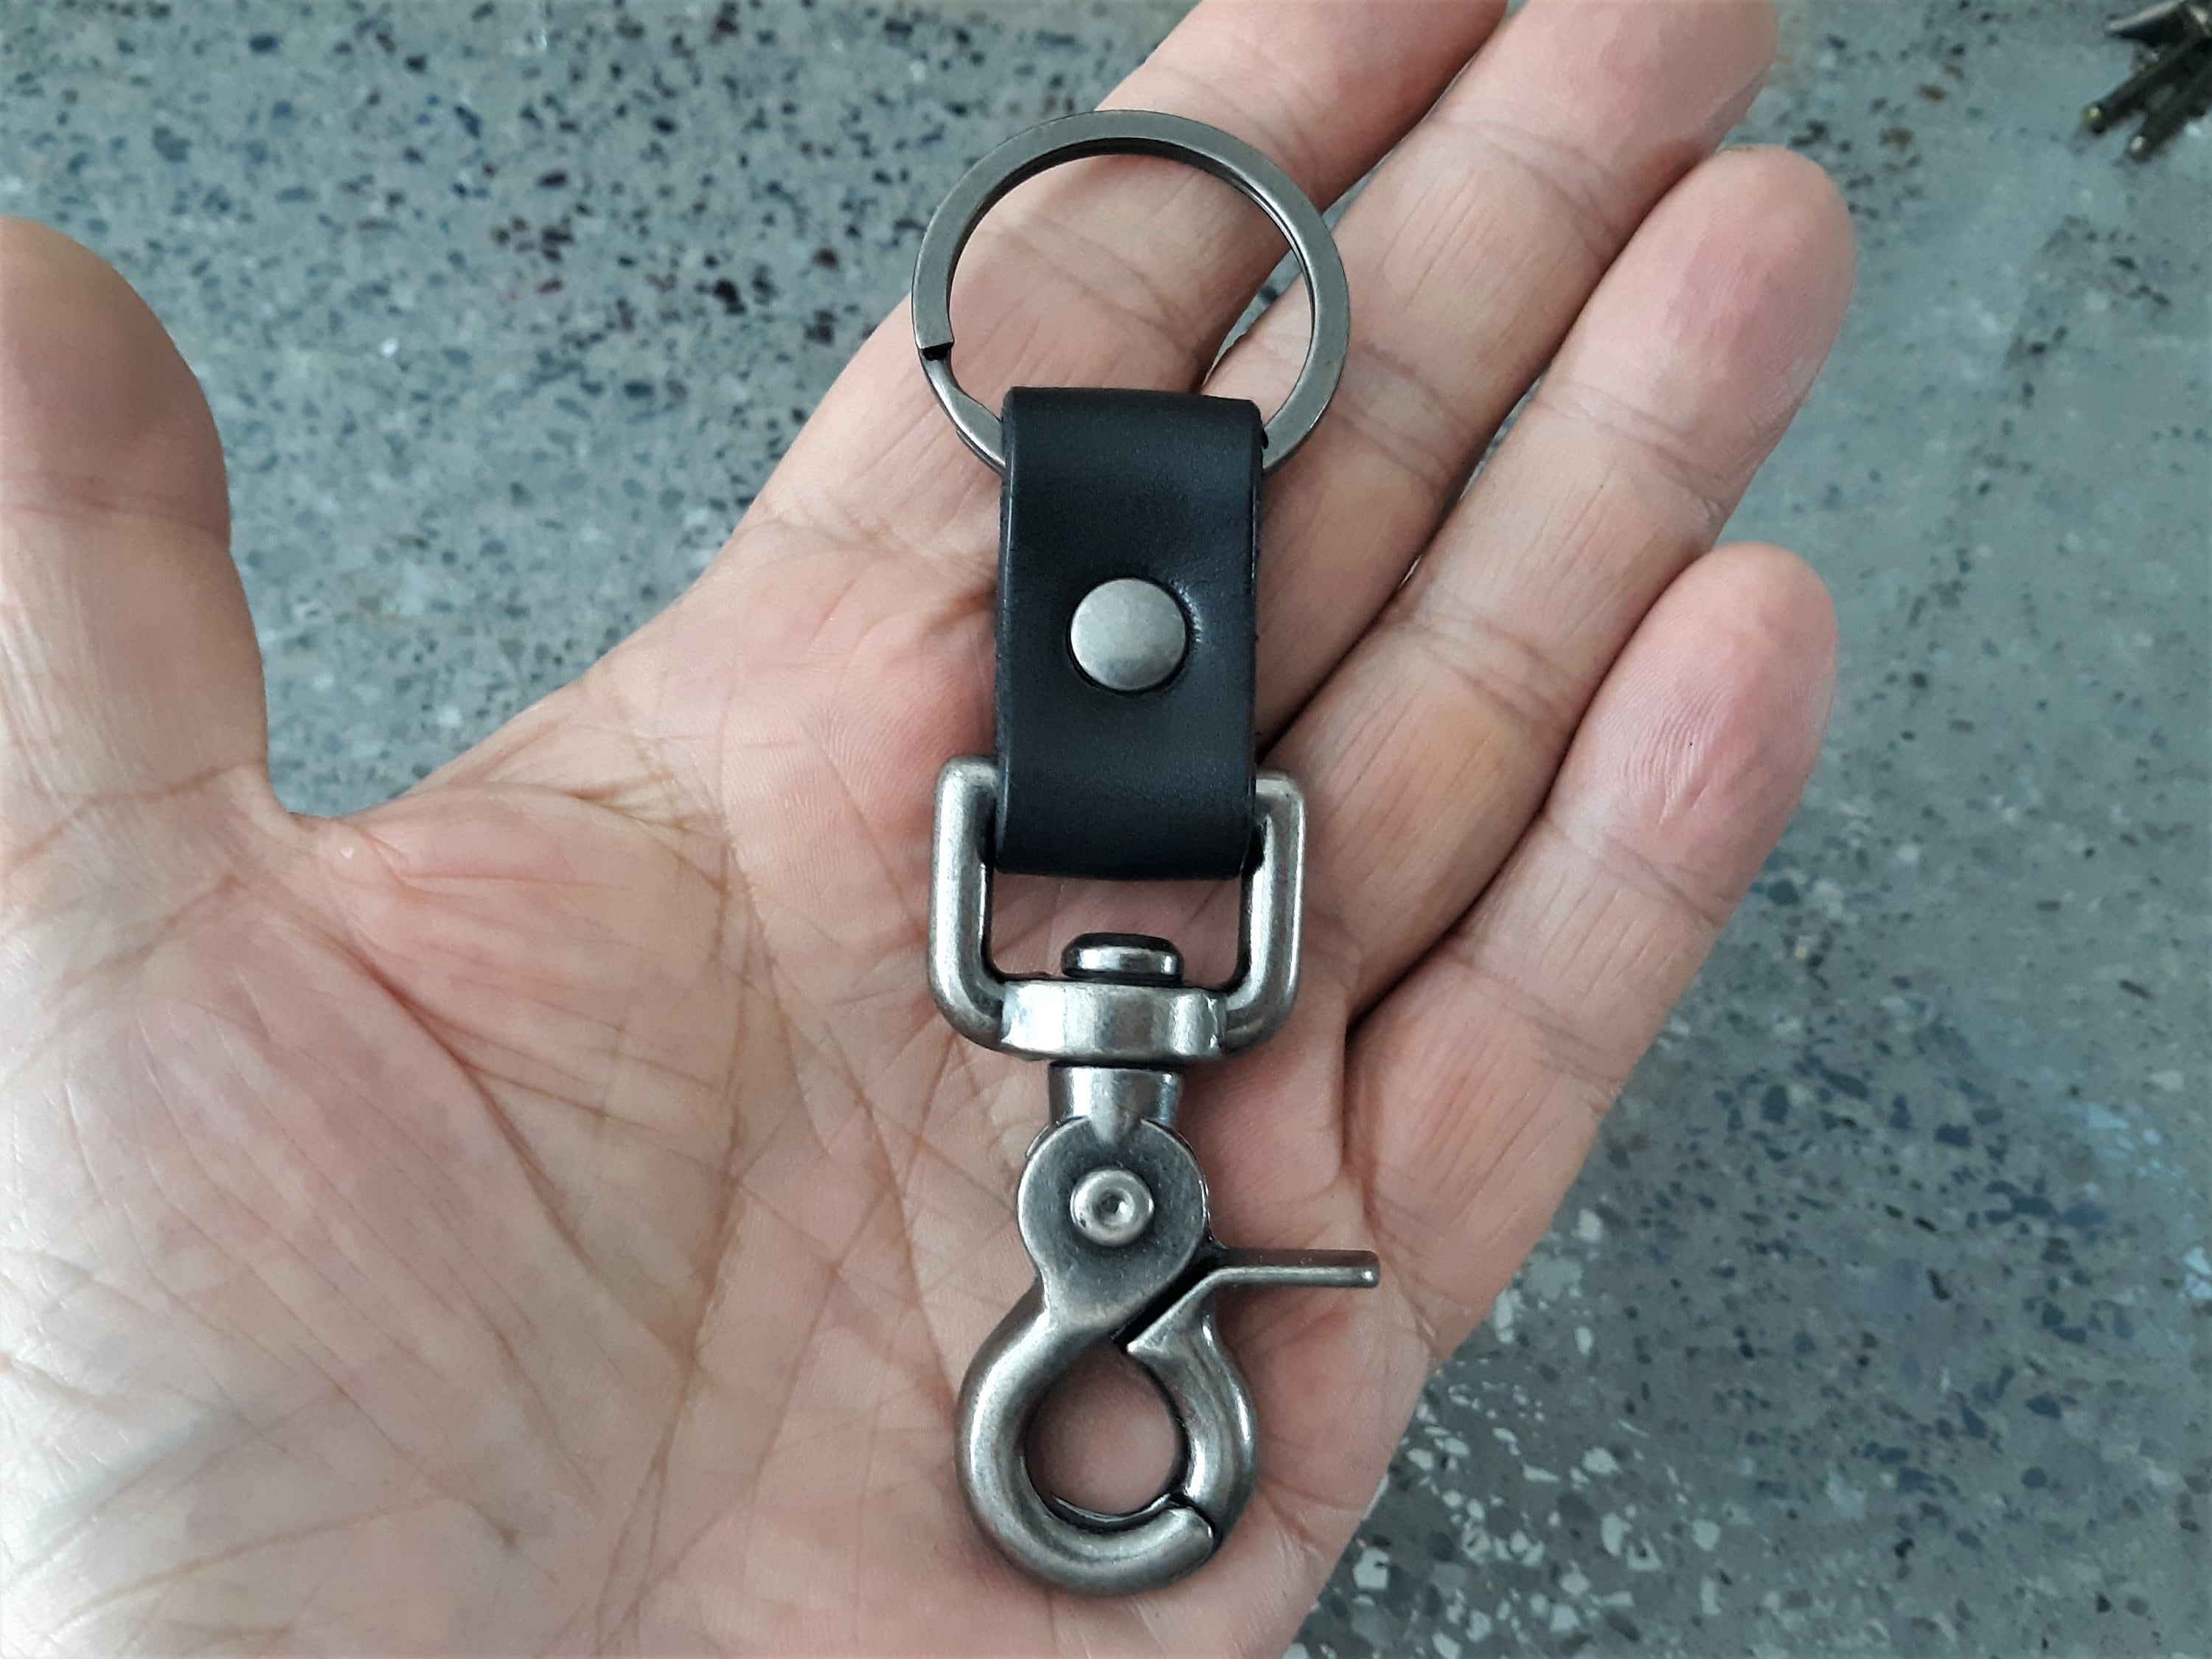 Shop for and Buy Key Support Belt Key Holder Clip On with Chain at .  Large selection and bulk discounts available.